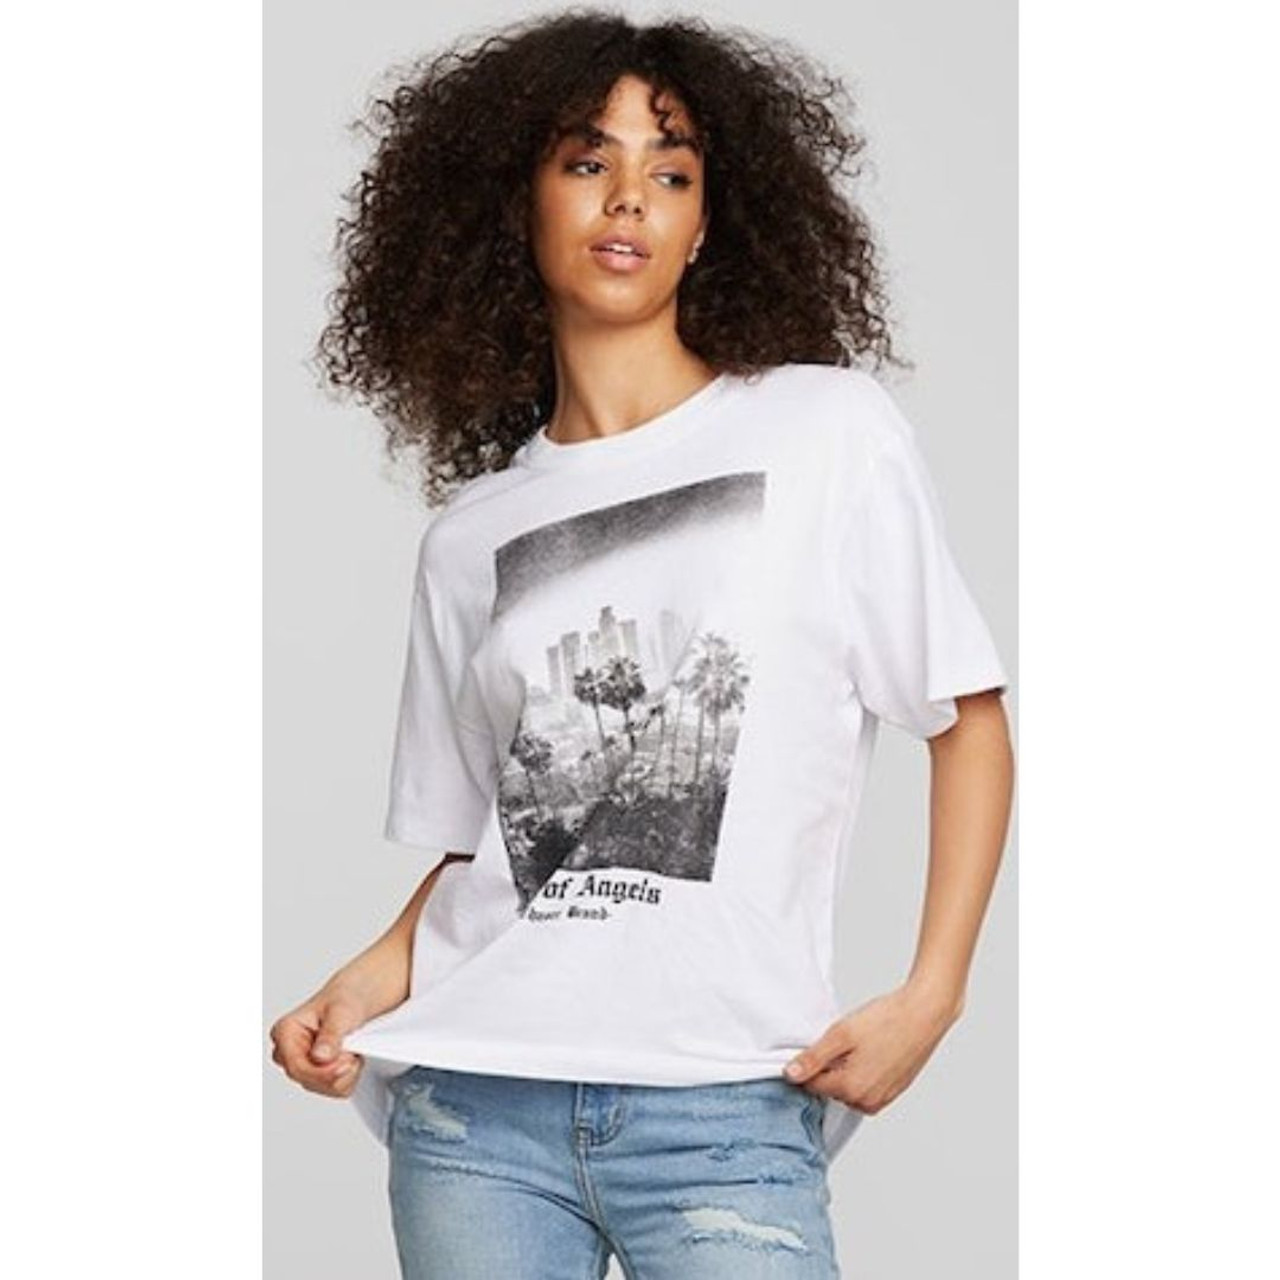 City of Angels Photograph Women's T-shirt by Chaser